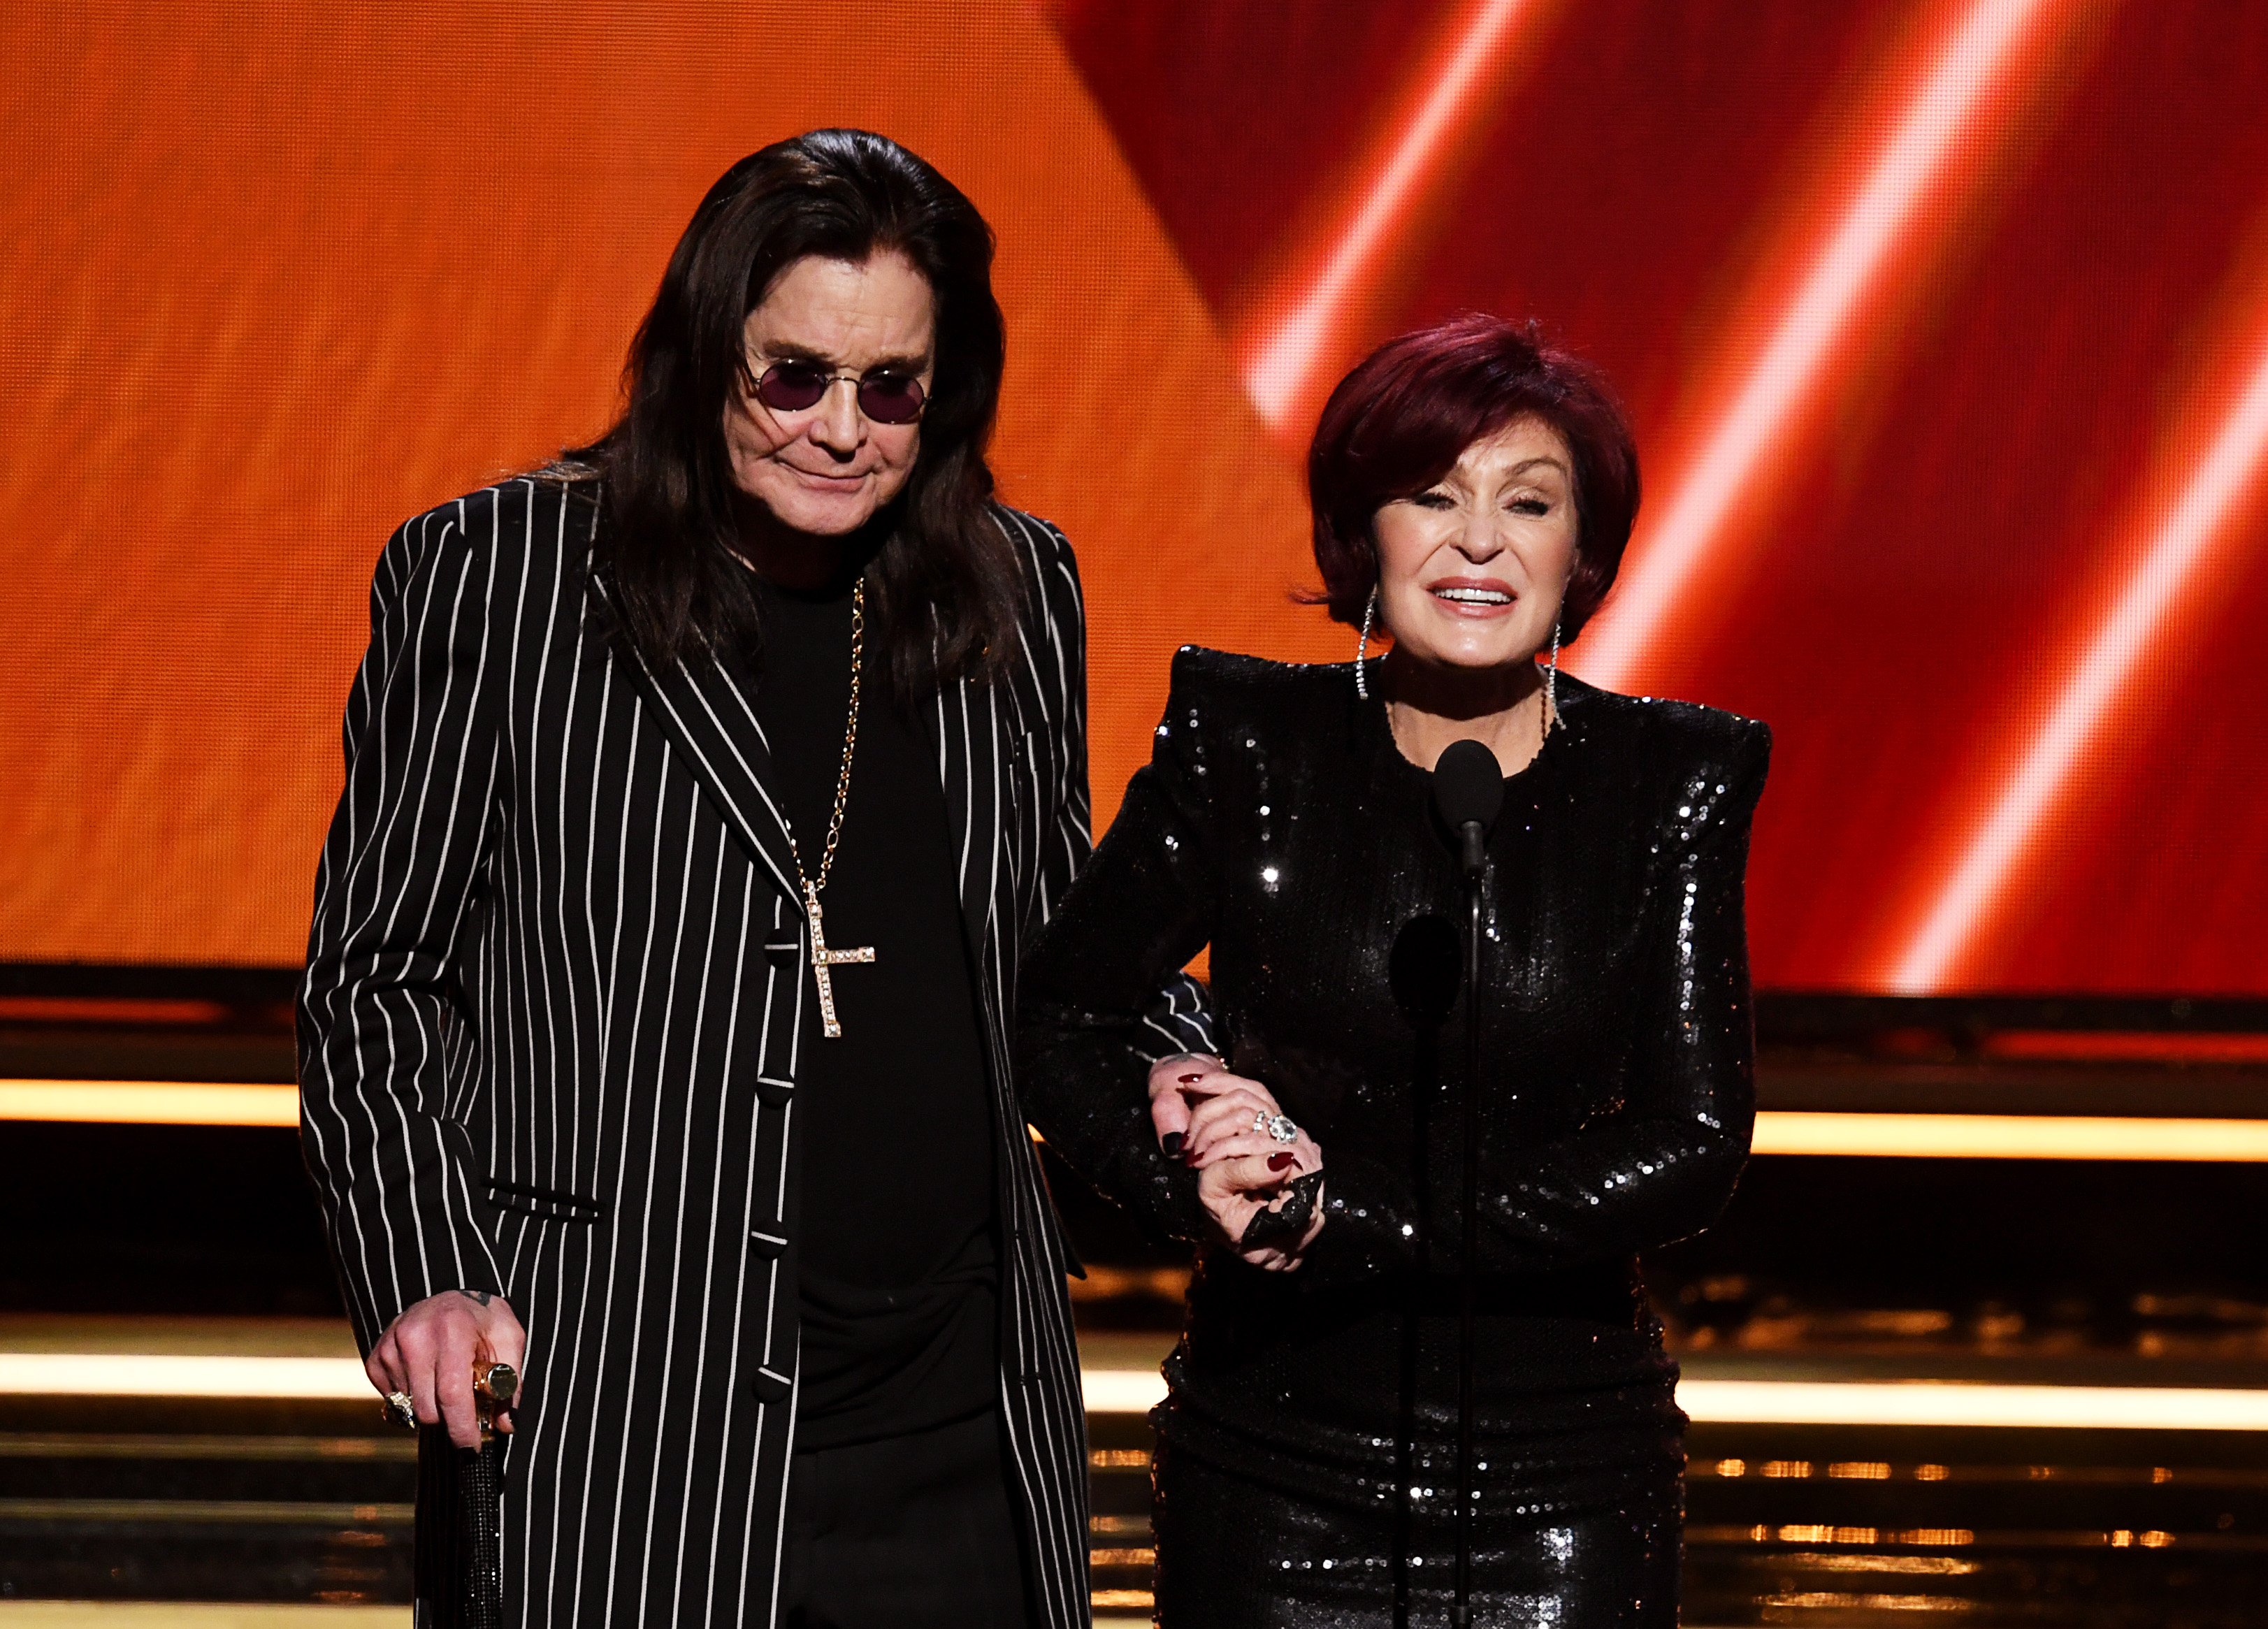 Ozzy and Sharon Osbourne at the 62nd Annual Grammy Awards on January 26, 2020, in Los Angeles, California | Source: Getty Images